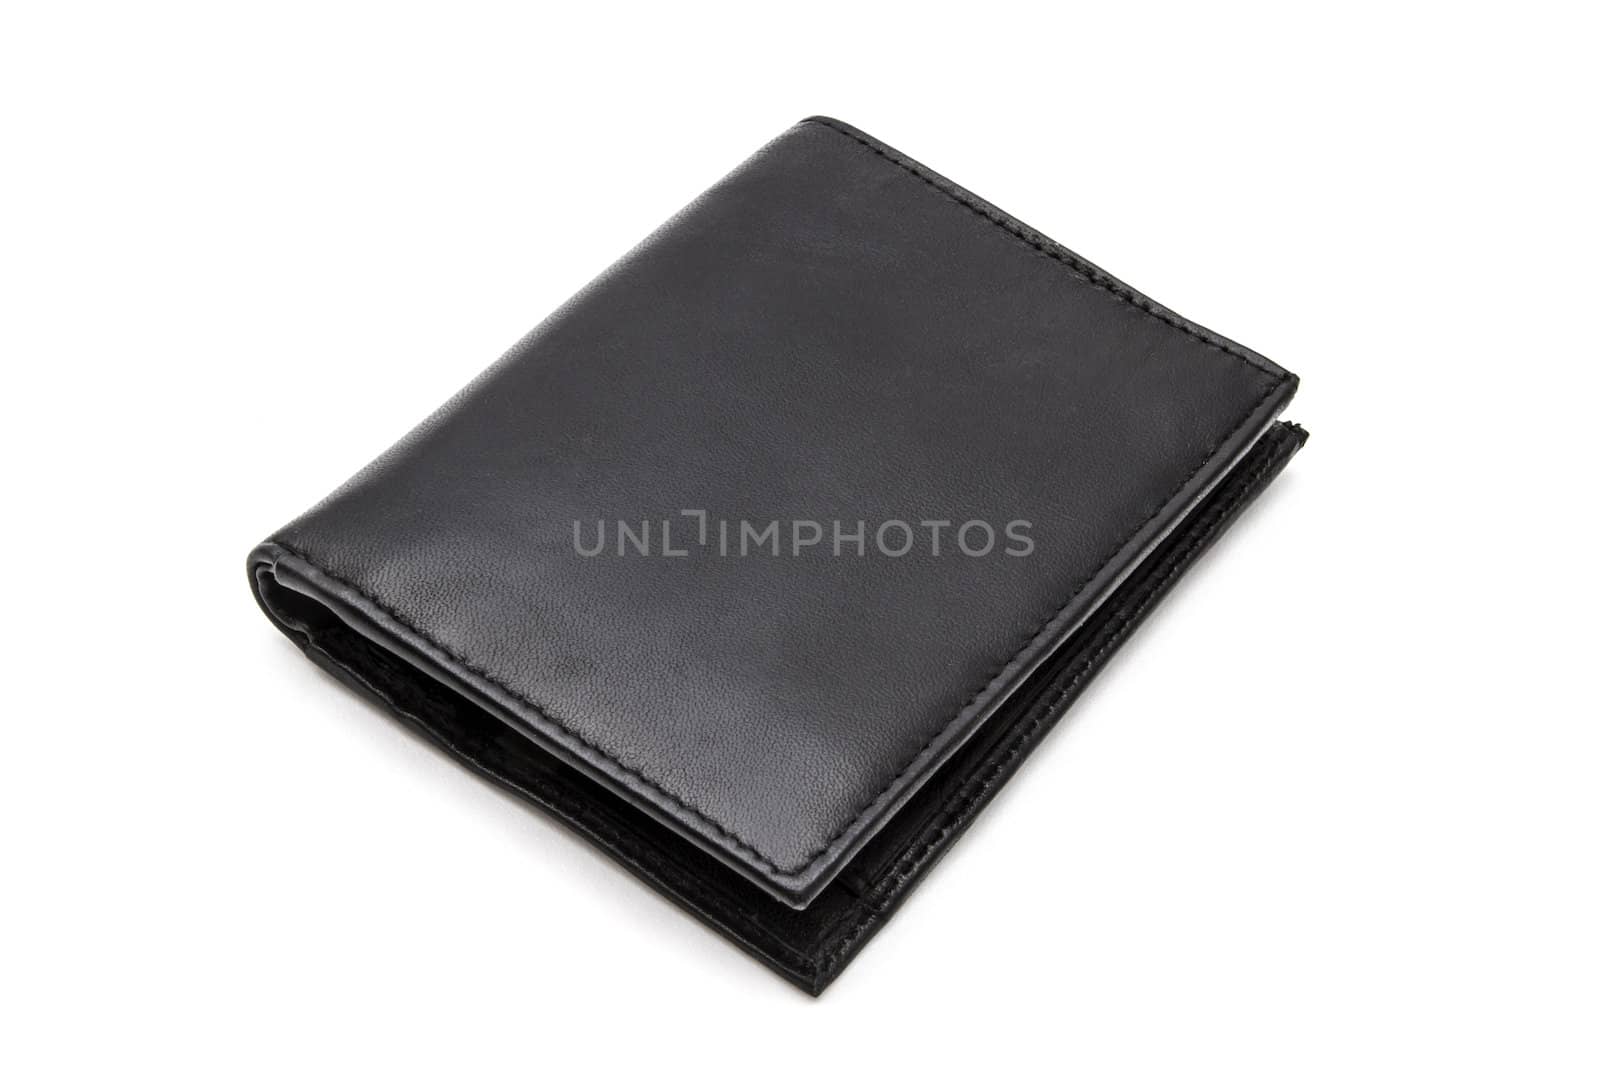 Black wallet isolated on white background